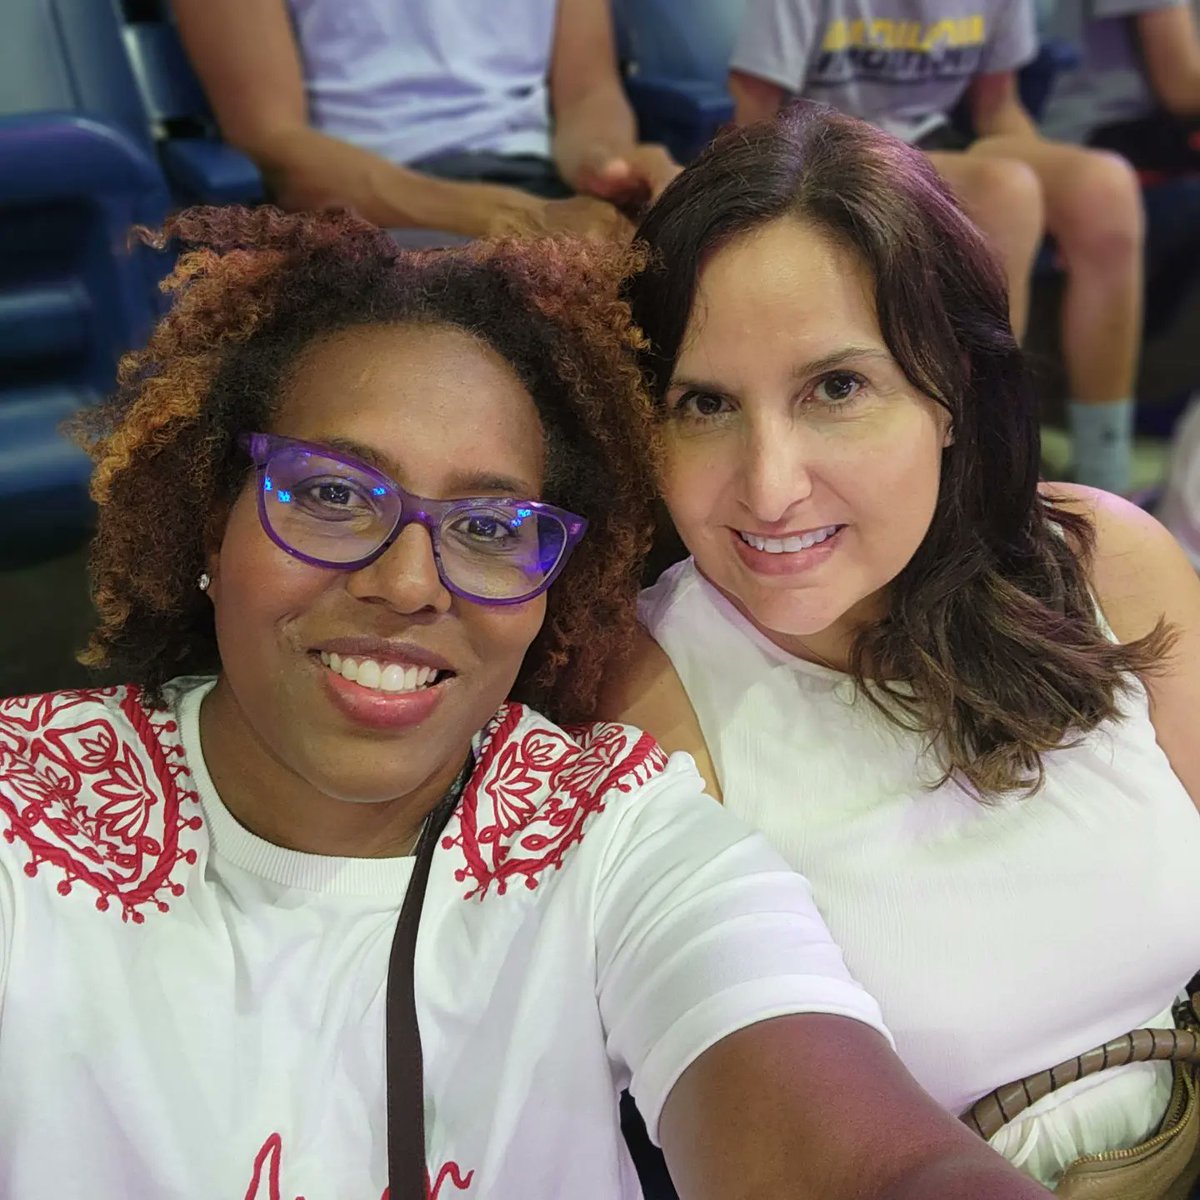 Sightings at the @serenawilliams Open with @VanessaYPerez. #usopen2022 #goat